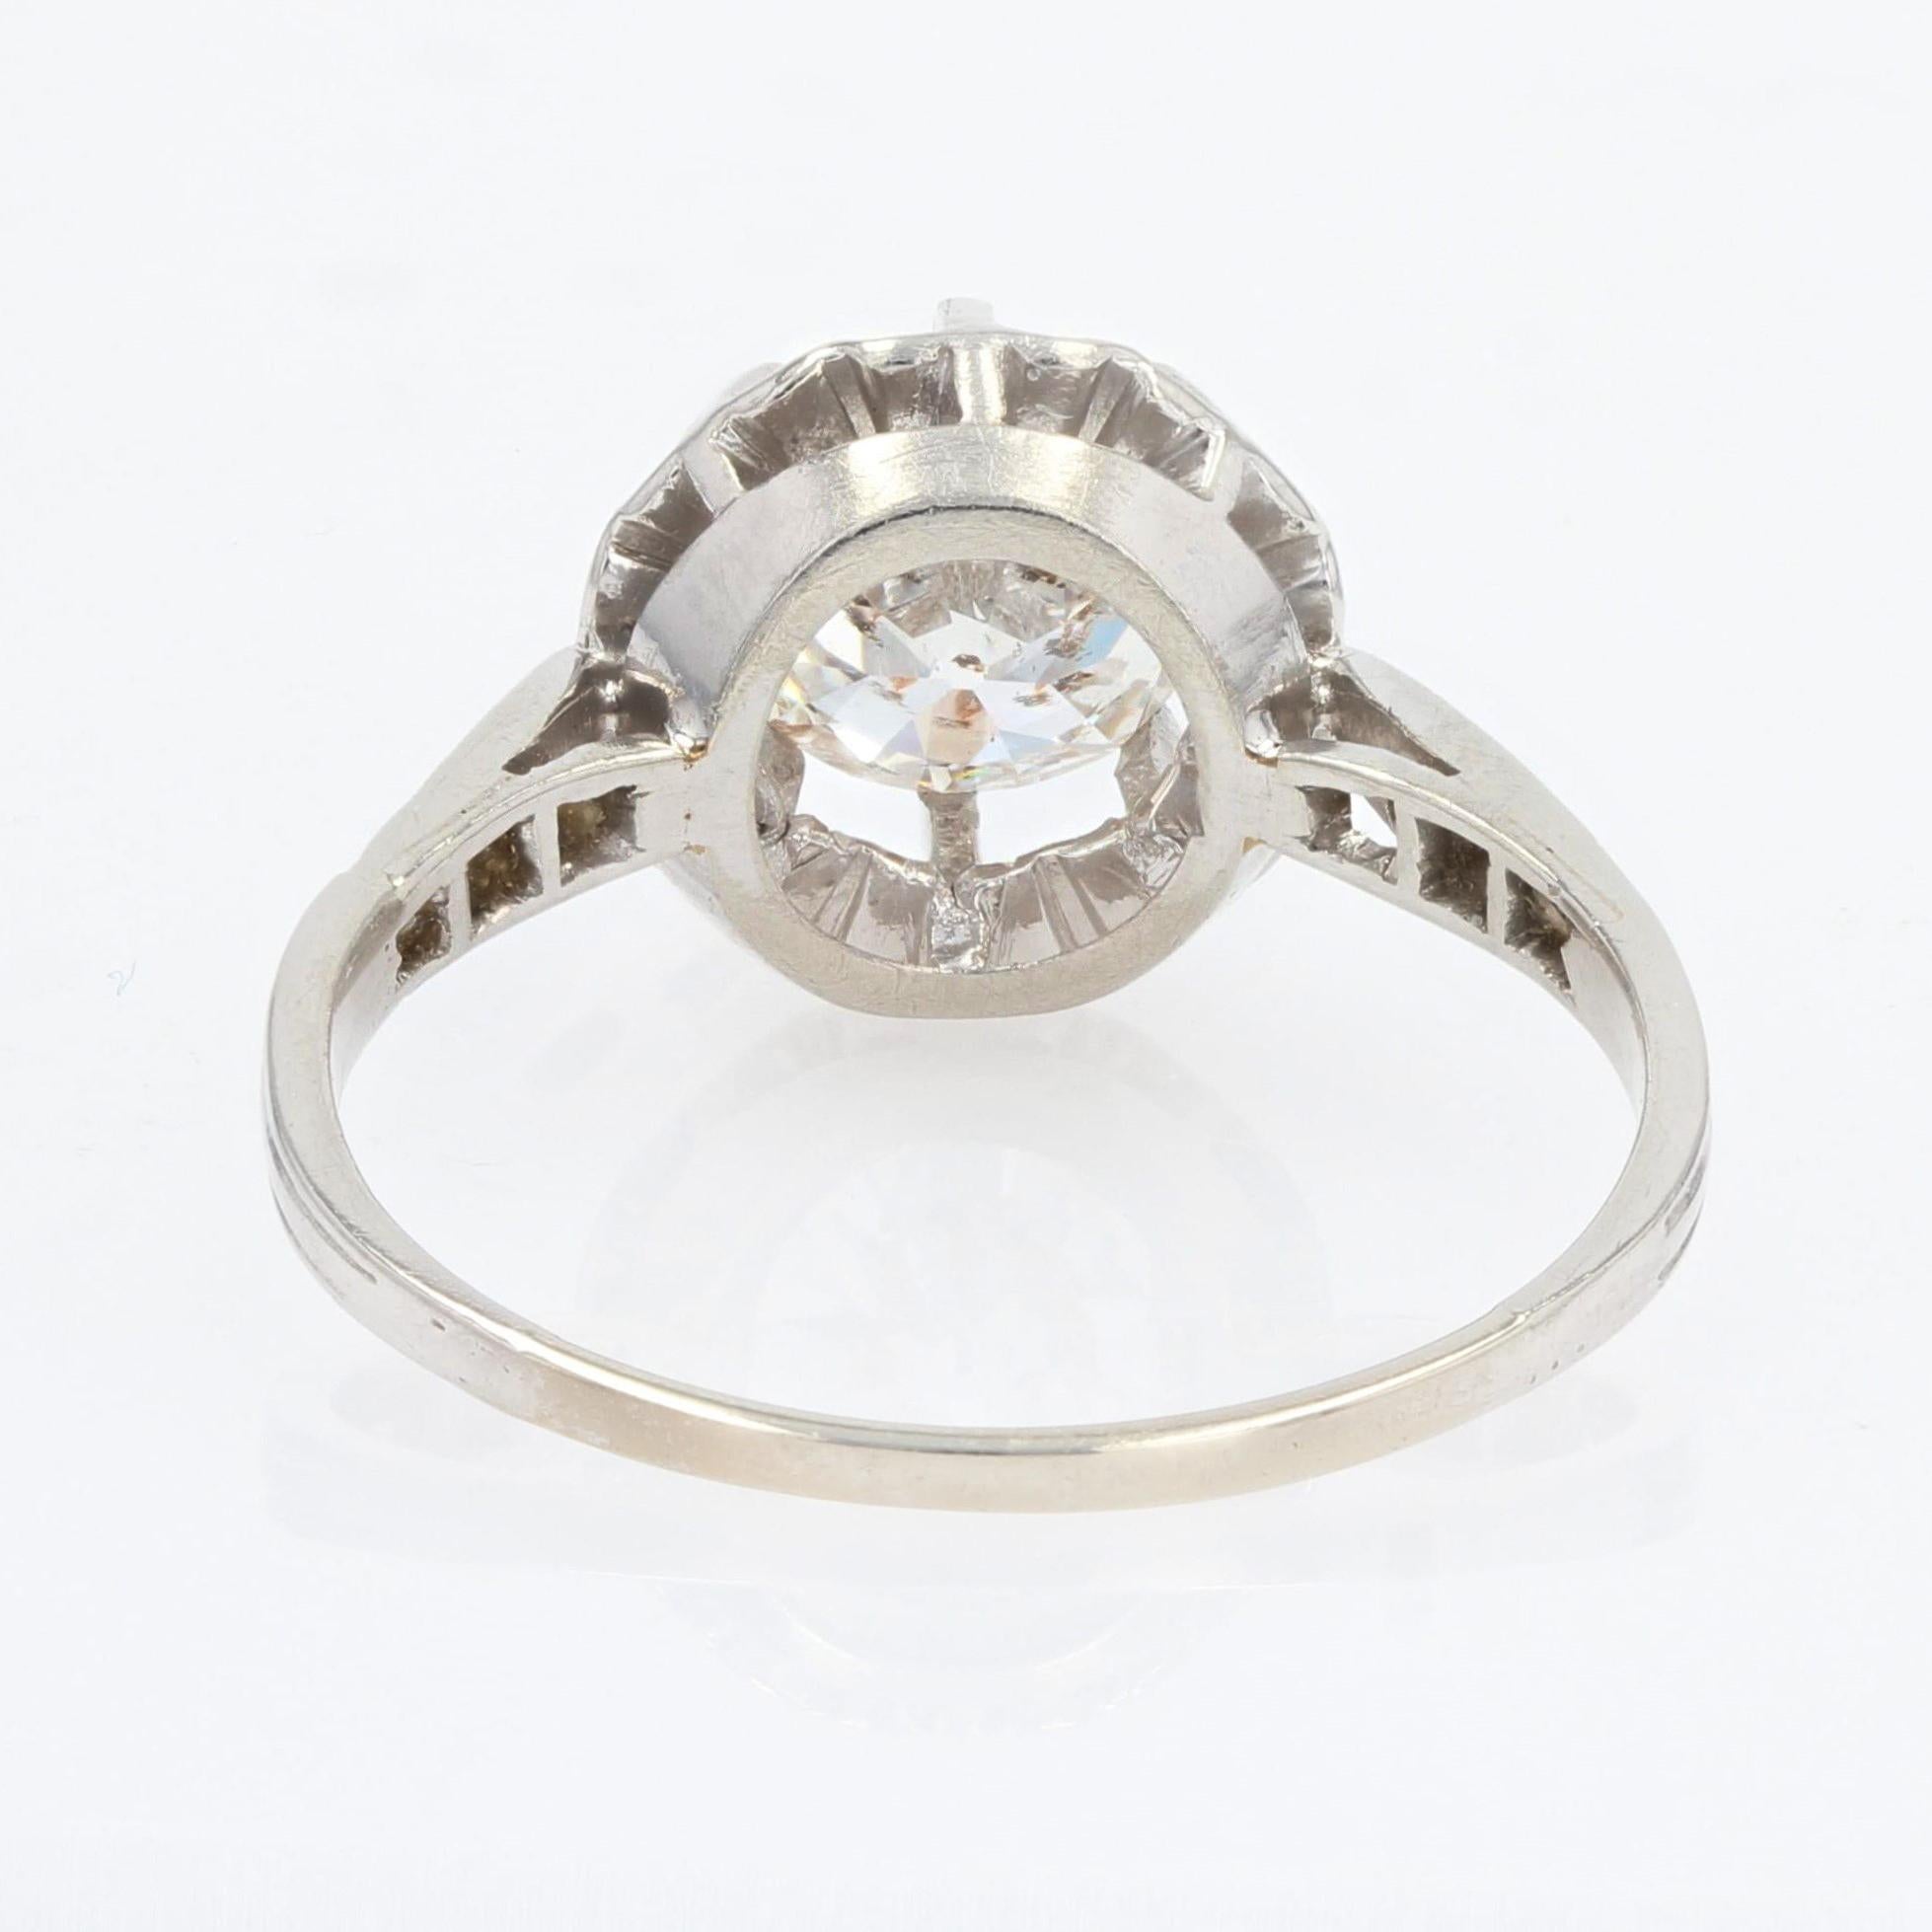 French 1950s 1.50 Carat Diamond Platinum Solitaire Ring For Sale 2